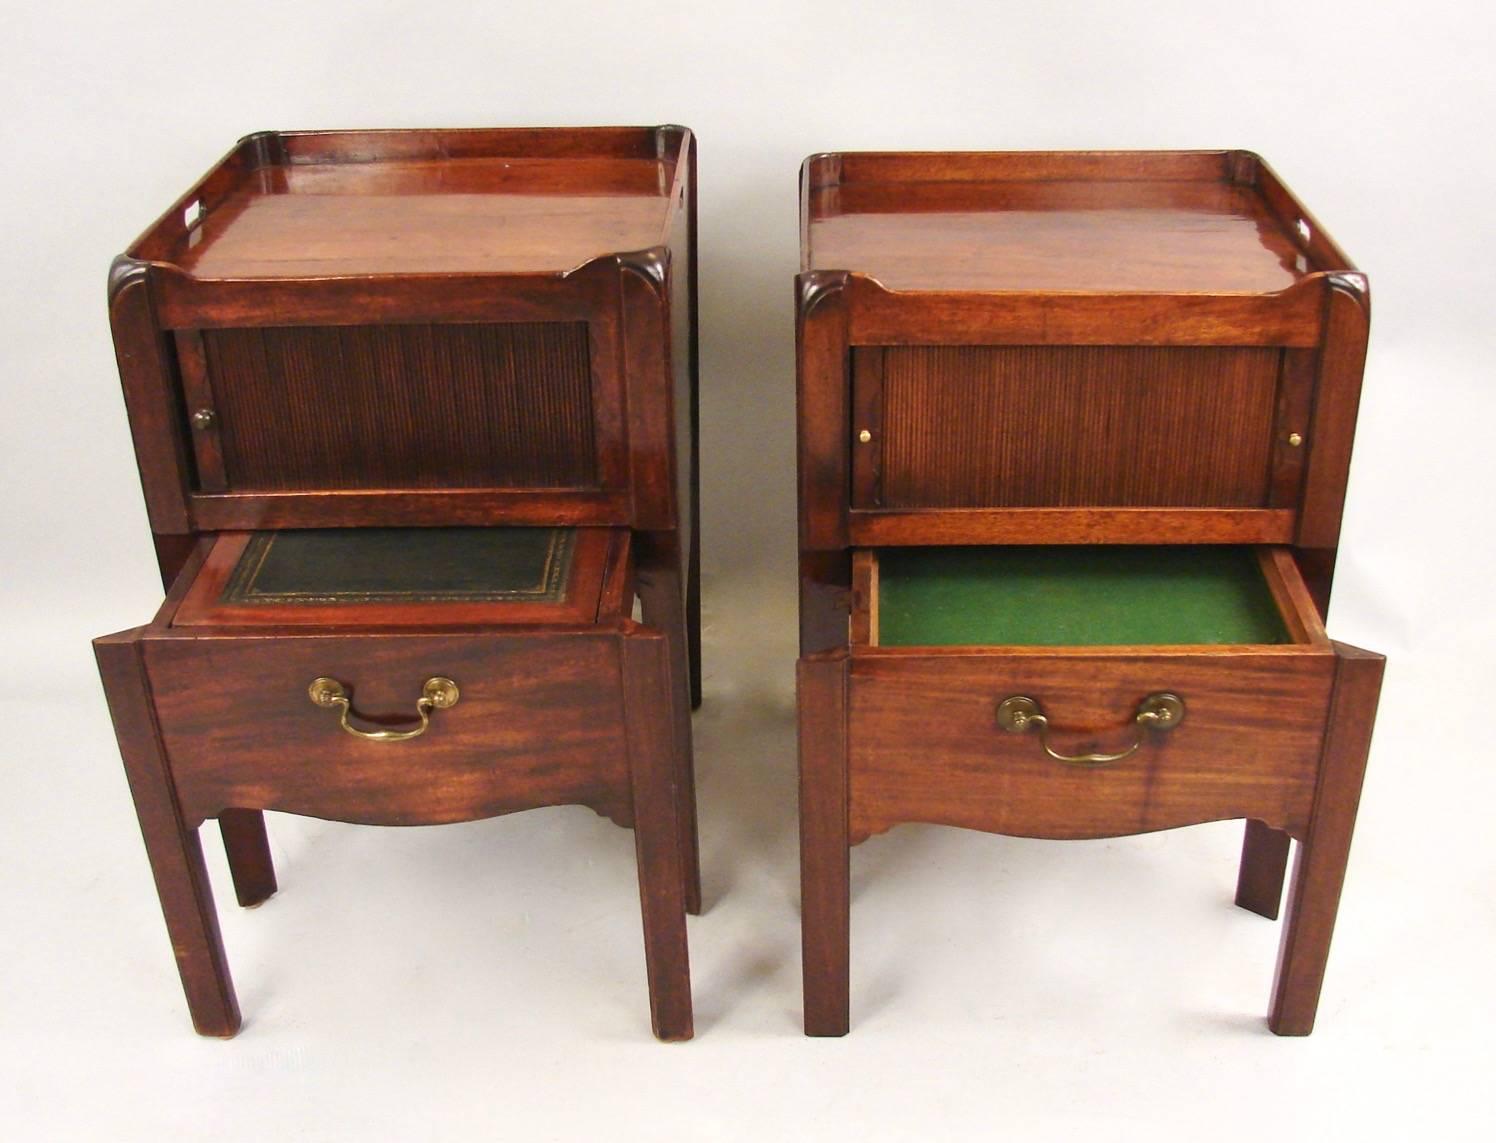 A matched pair of Georgian mahogany tray top bedside commodes with cut-out carrying handles, each with a sliding tambour above a modified single drawer with brass bale and a shaped apron supported on square legs, circa 1800-1820. Variations in